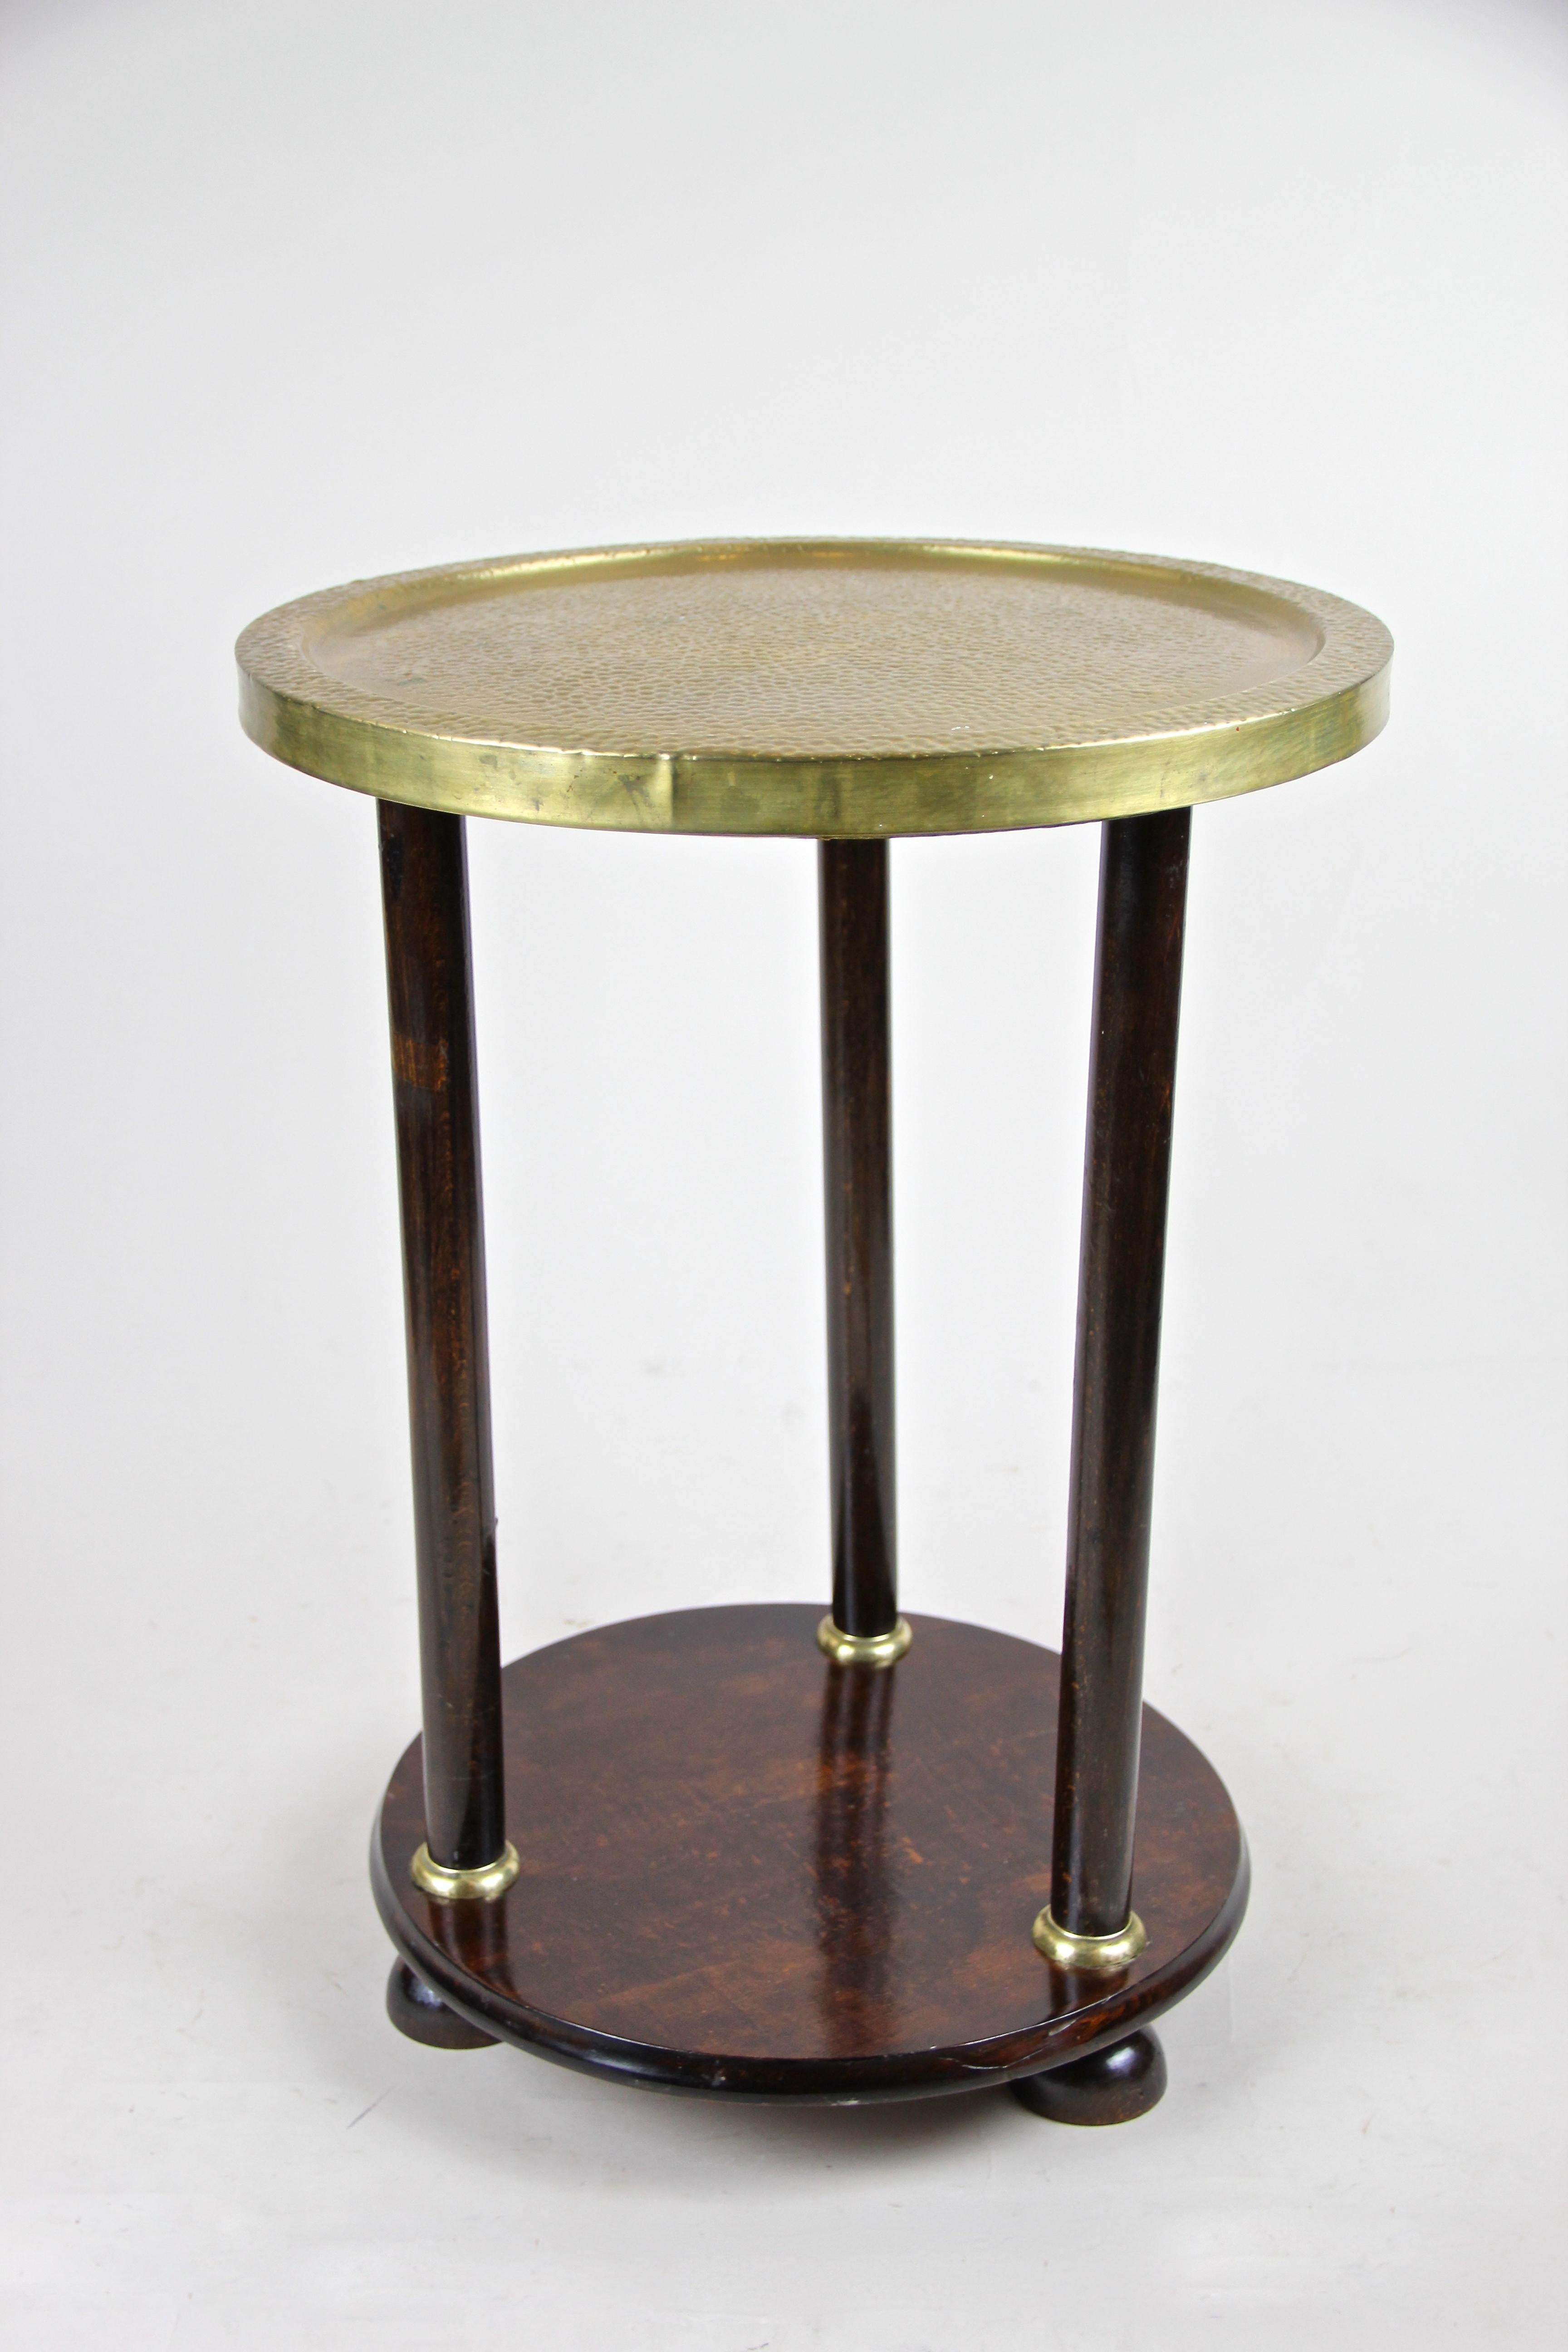 Art Nouveau Gueridon Side Table with Brass Table Top Attributed to Kohn, Austria, circa 1910